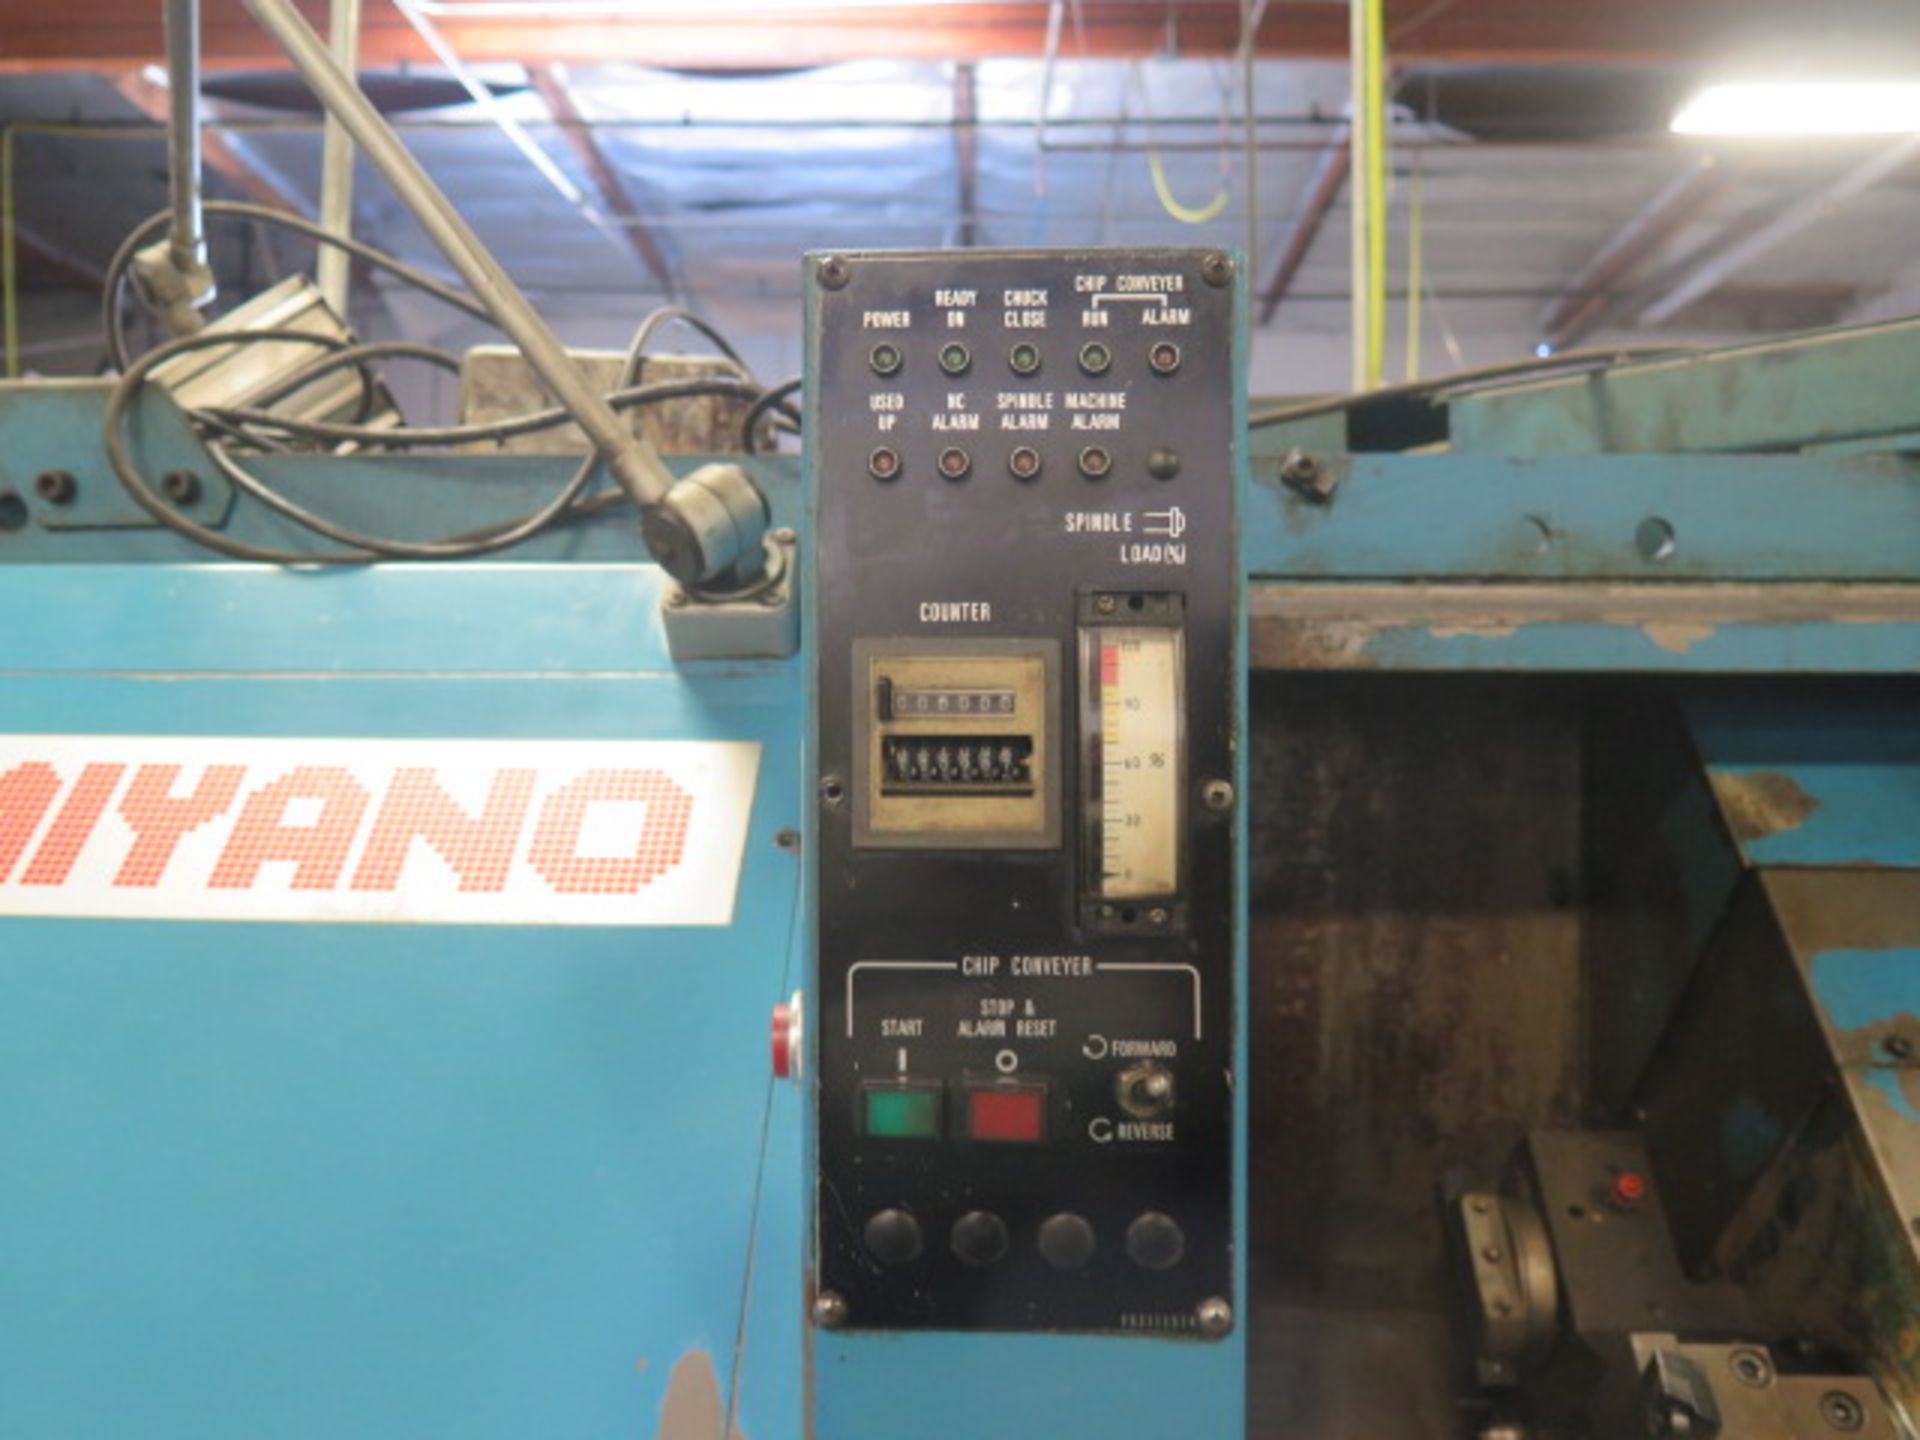 Miyano JNC-35 CNC Turning Center s/n JN350360 w/ Fanuc System 10T Controls, 8-Station, SOLD AS IS - Image 8 of 11